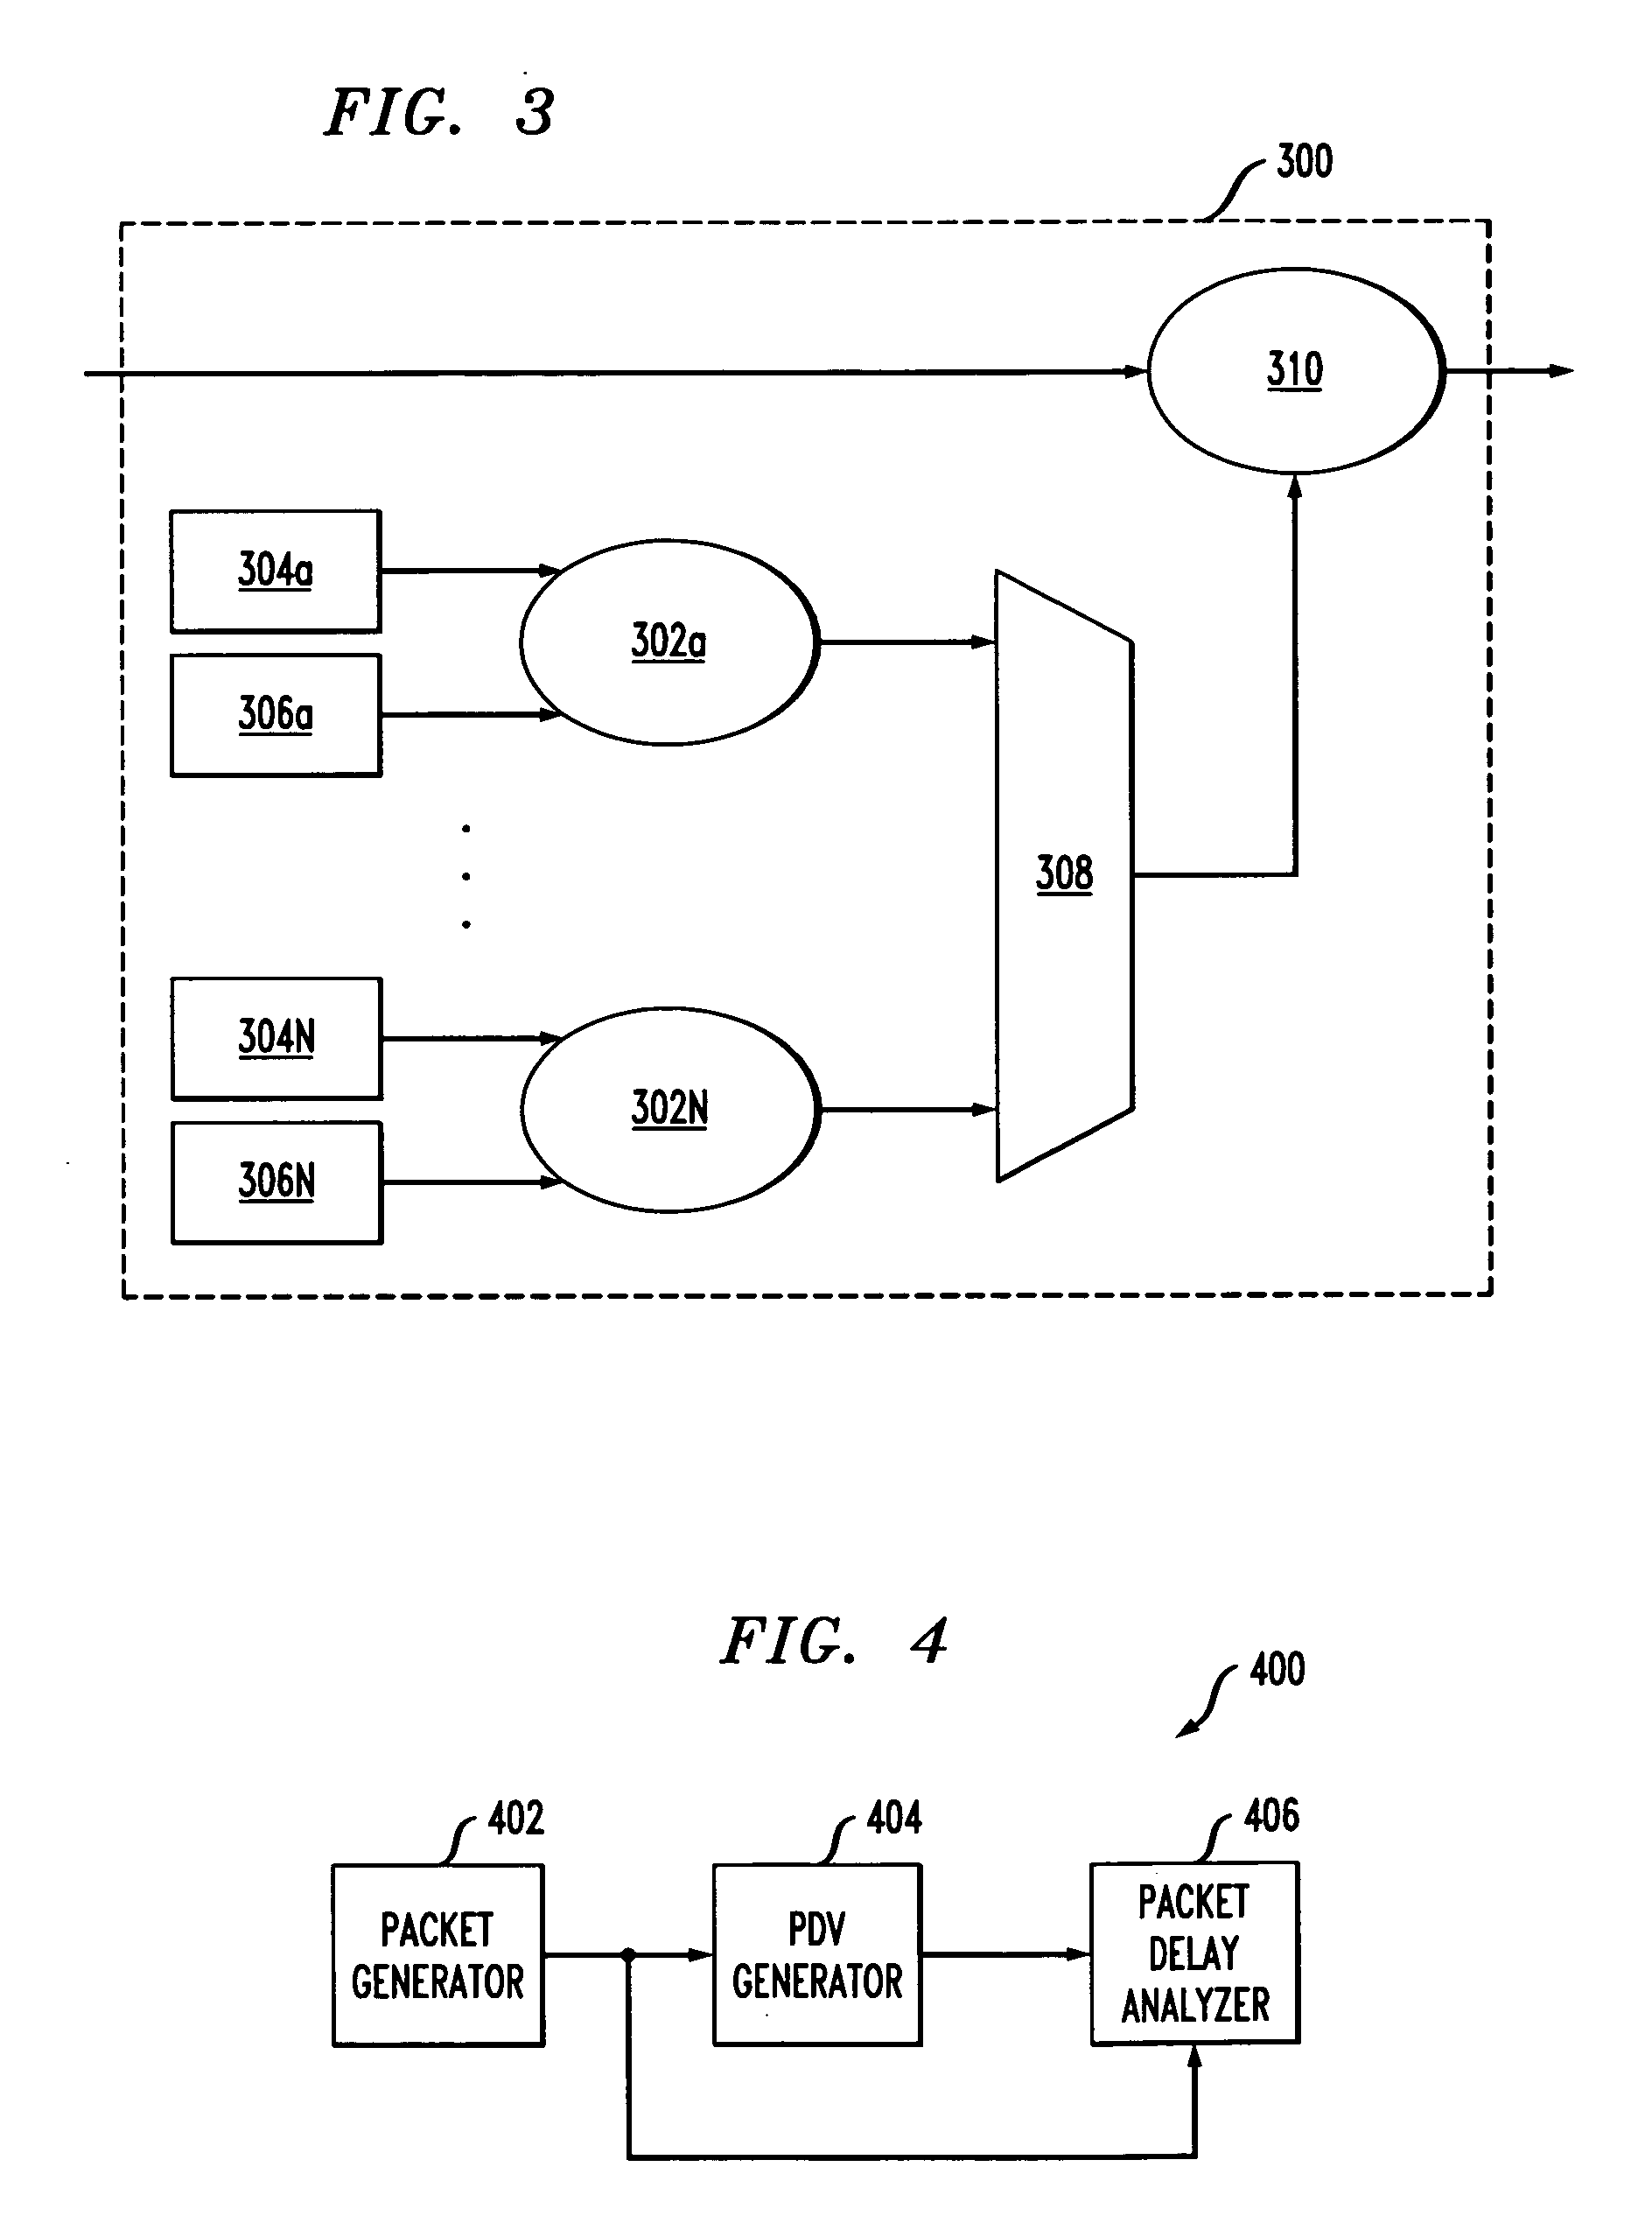 Method and apparatus for simulating packet delay variation of a multi-switch network